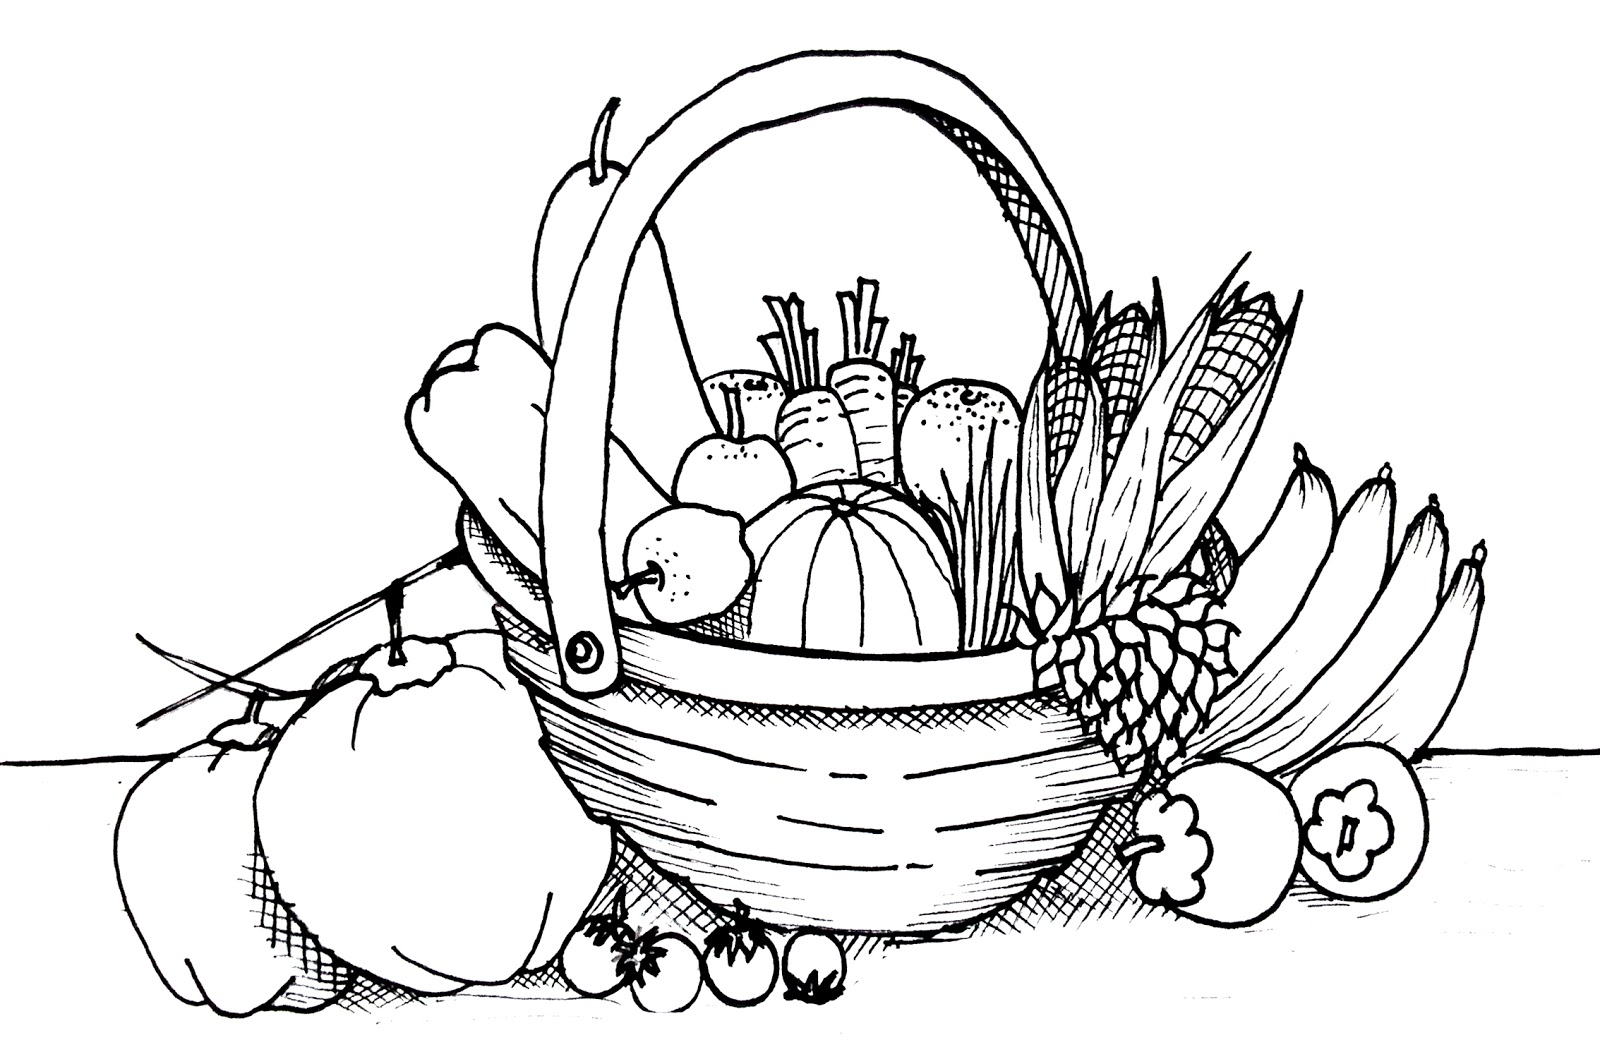 Vegetables Coloring Page Vegetable Coloring Pages Best Coloring Pages For Kids